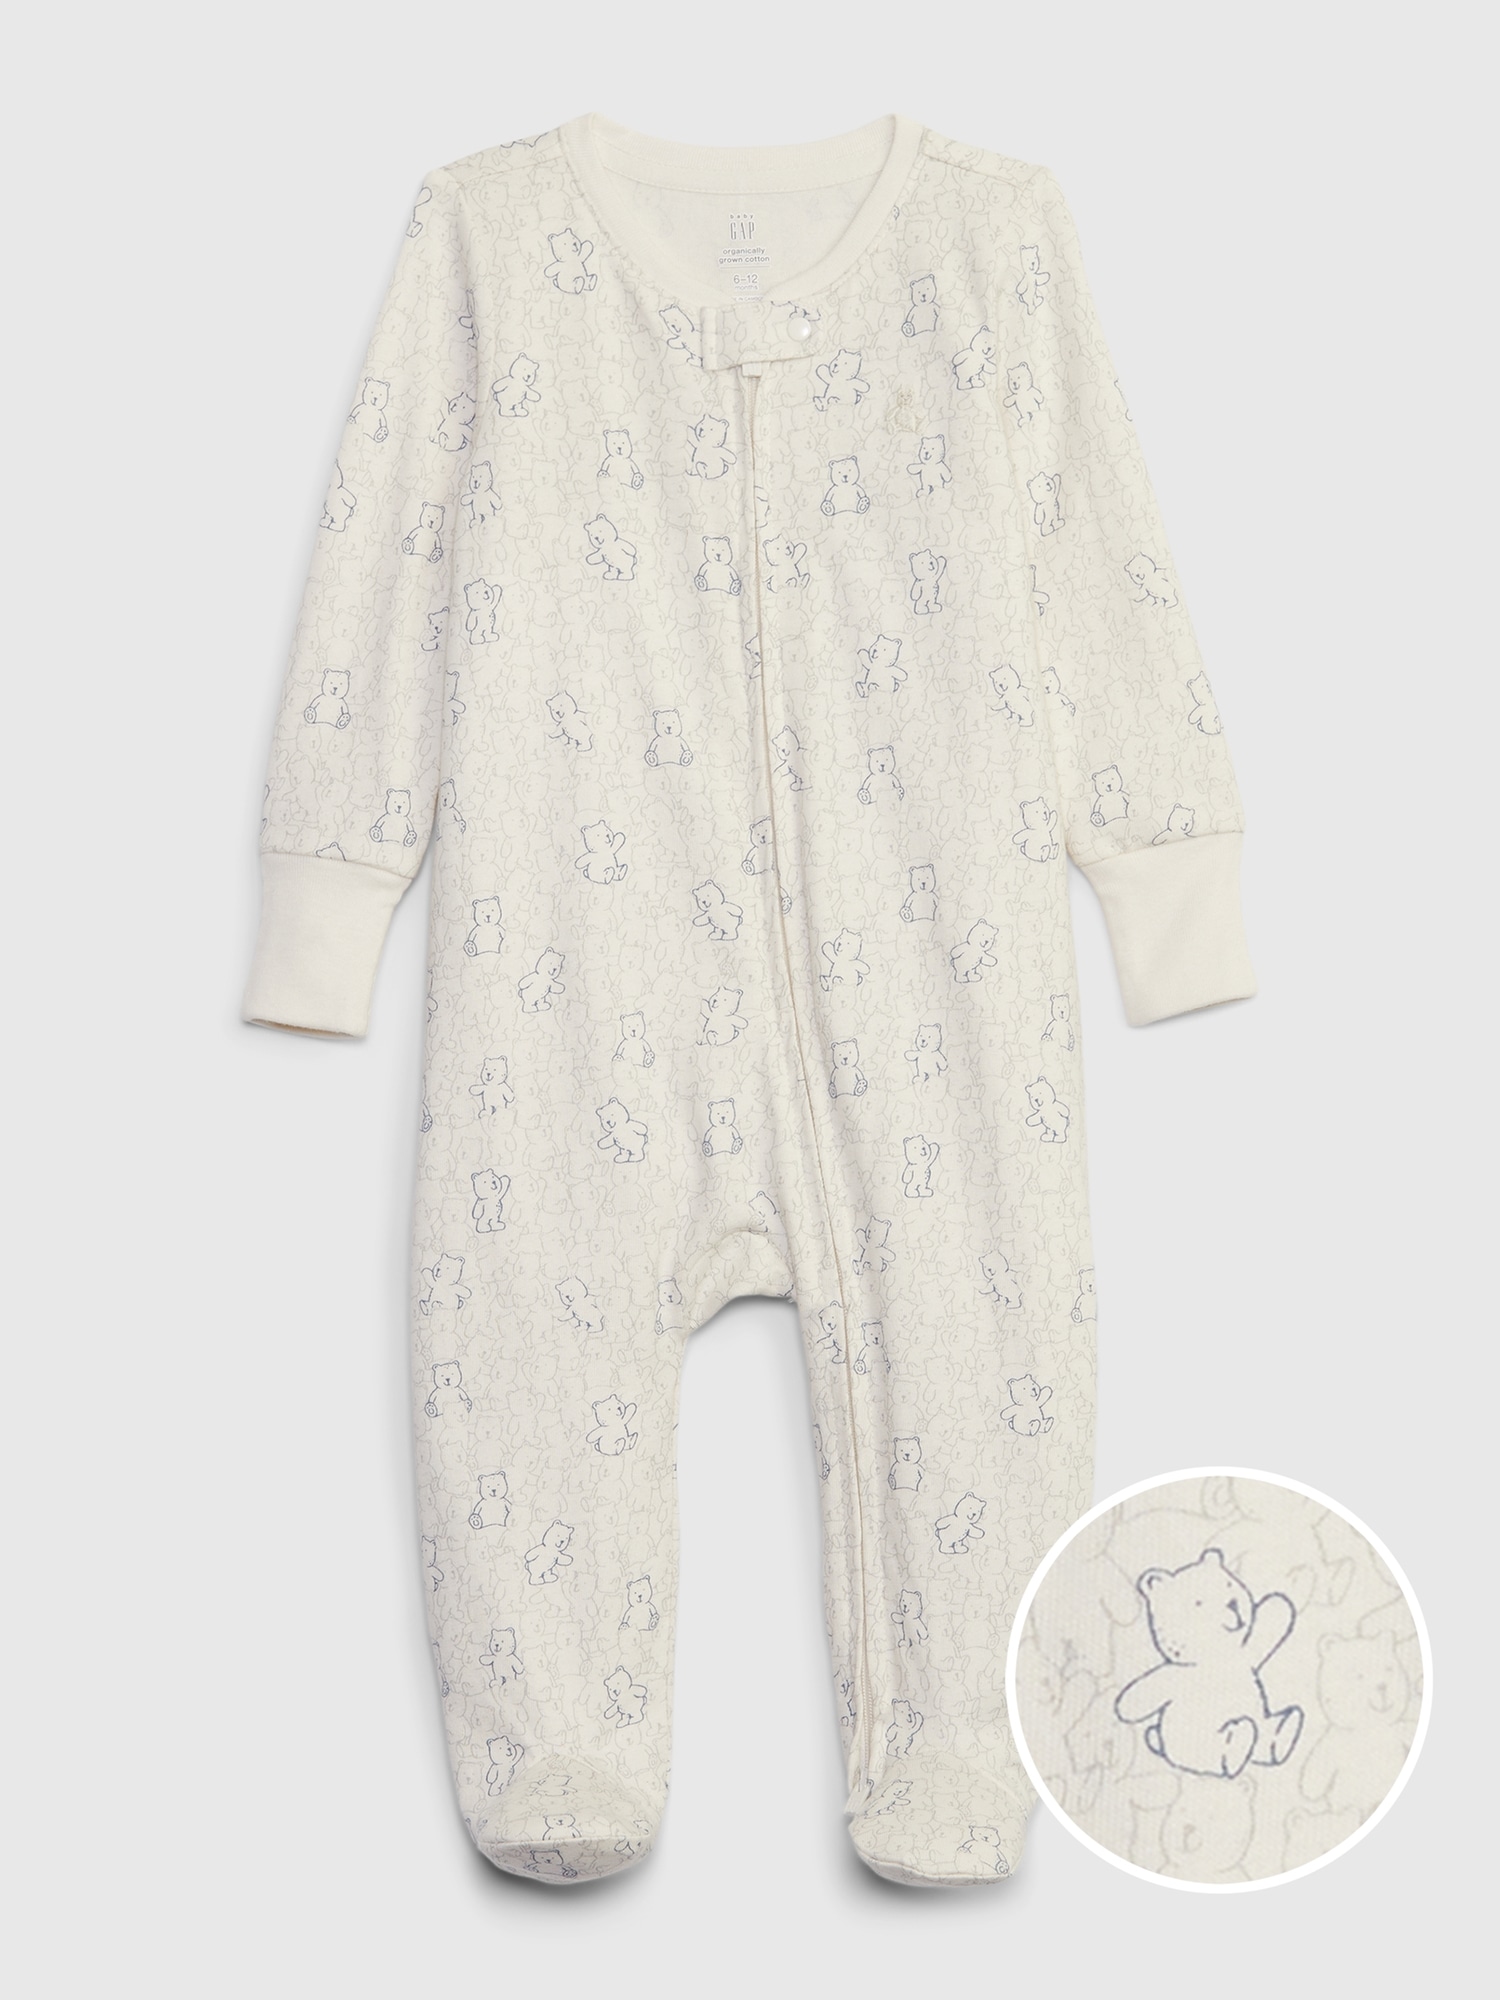 Gap Baby First Favorites 100% Organic CloudCotton Footed One-Piece